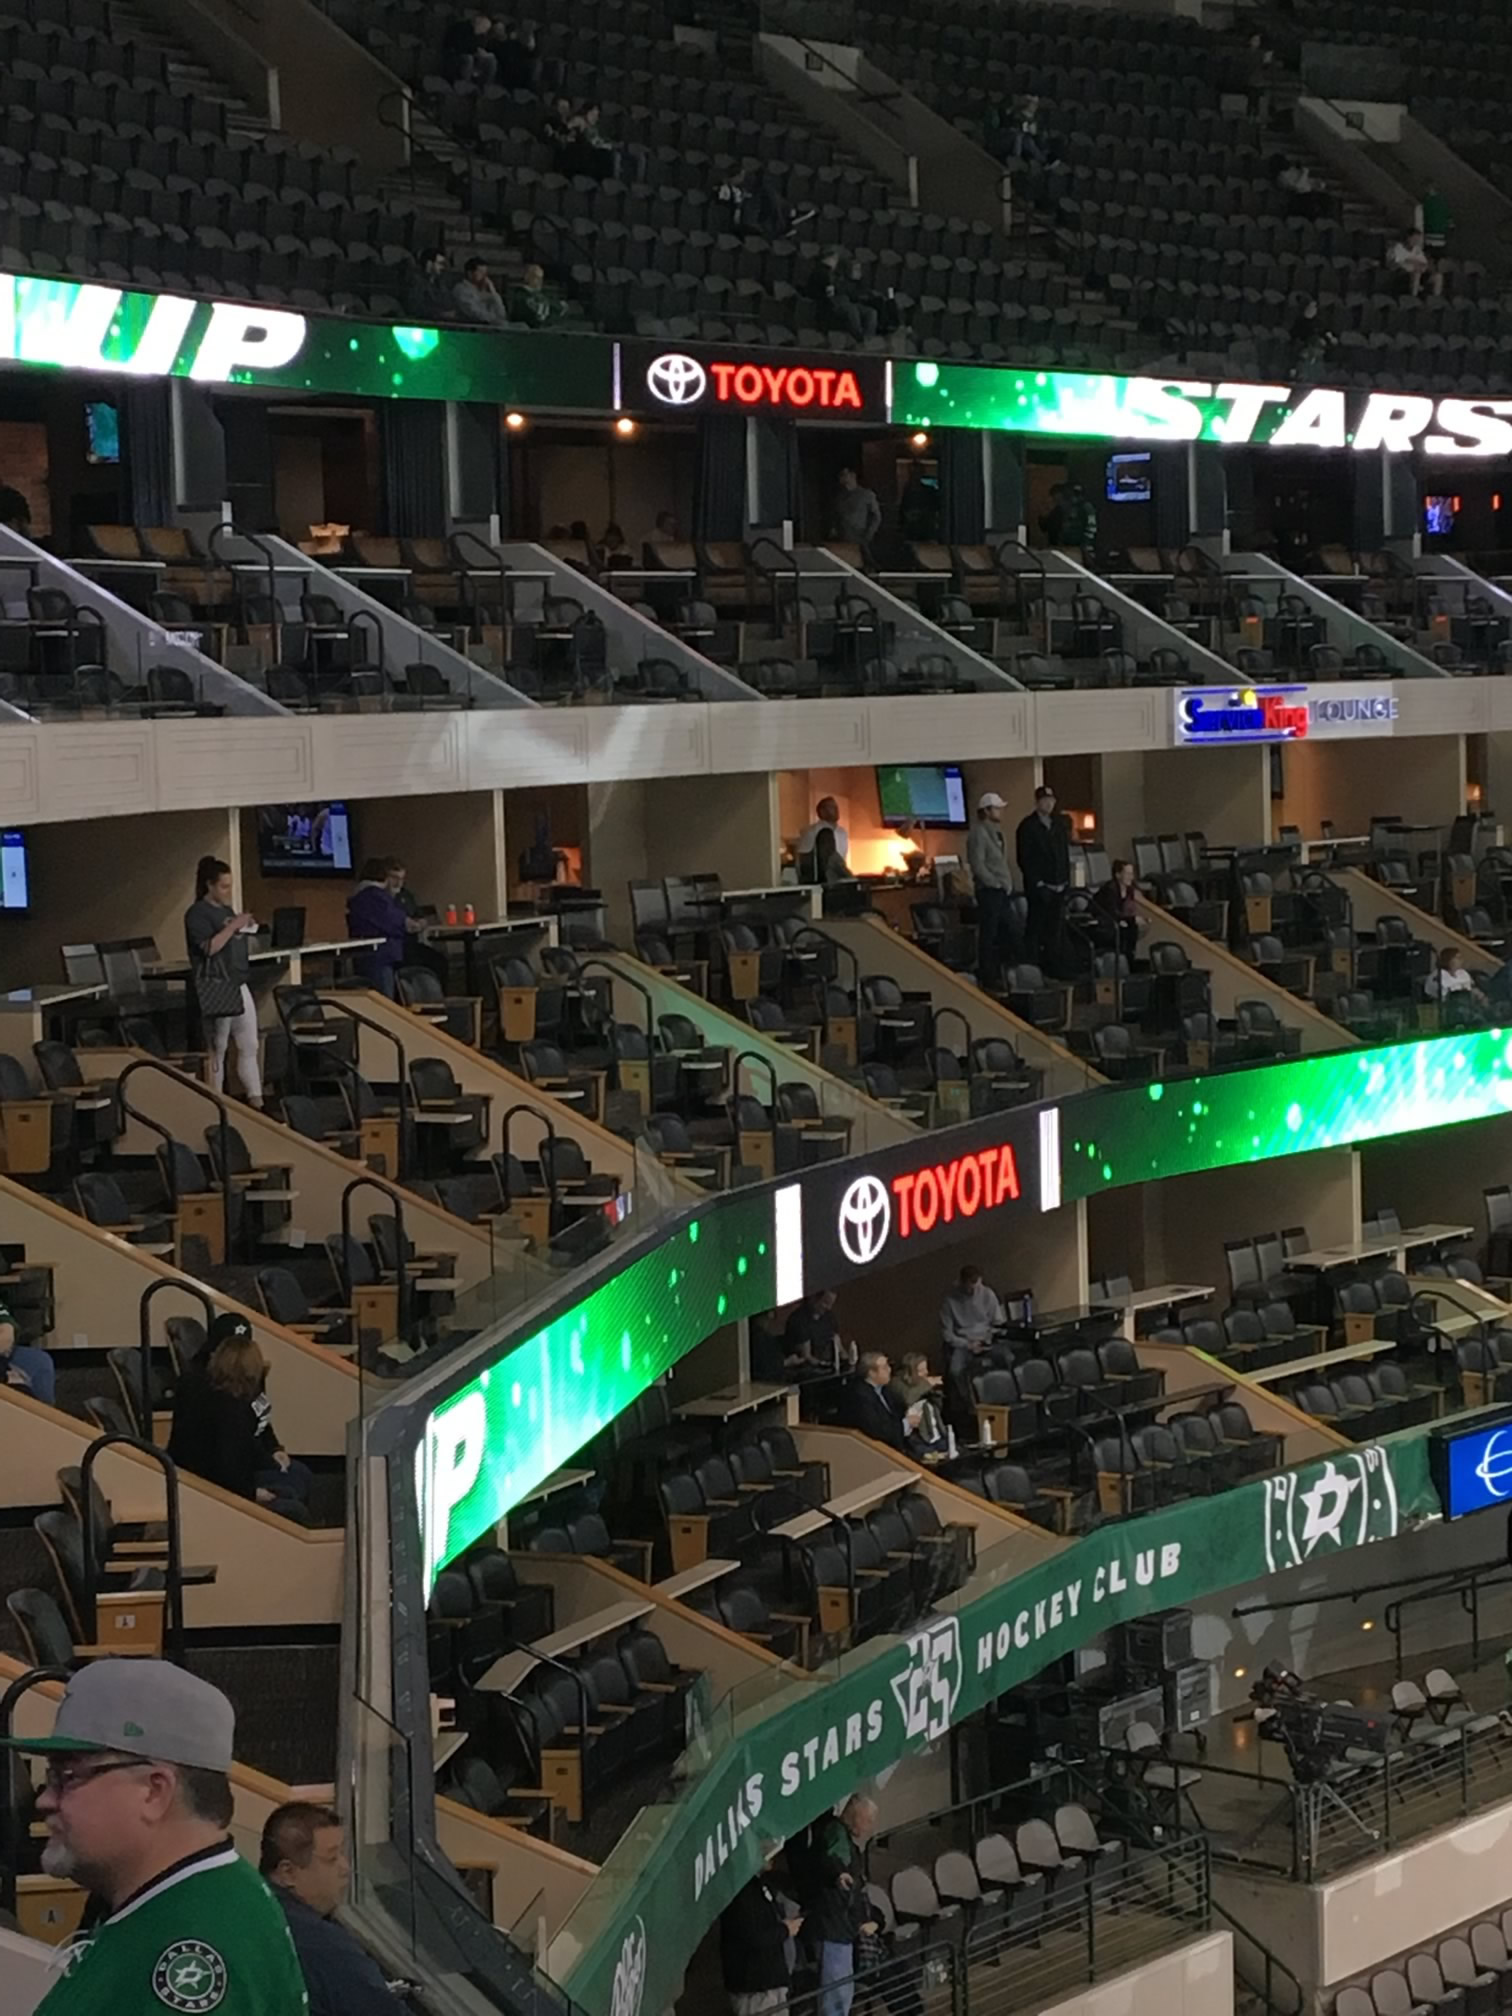 American Airlines Center, section 314, home of Dallas Stars